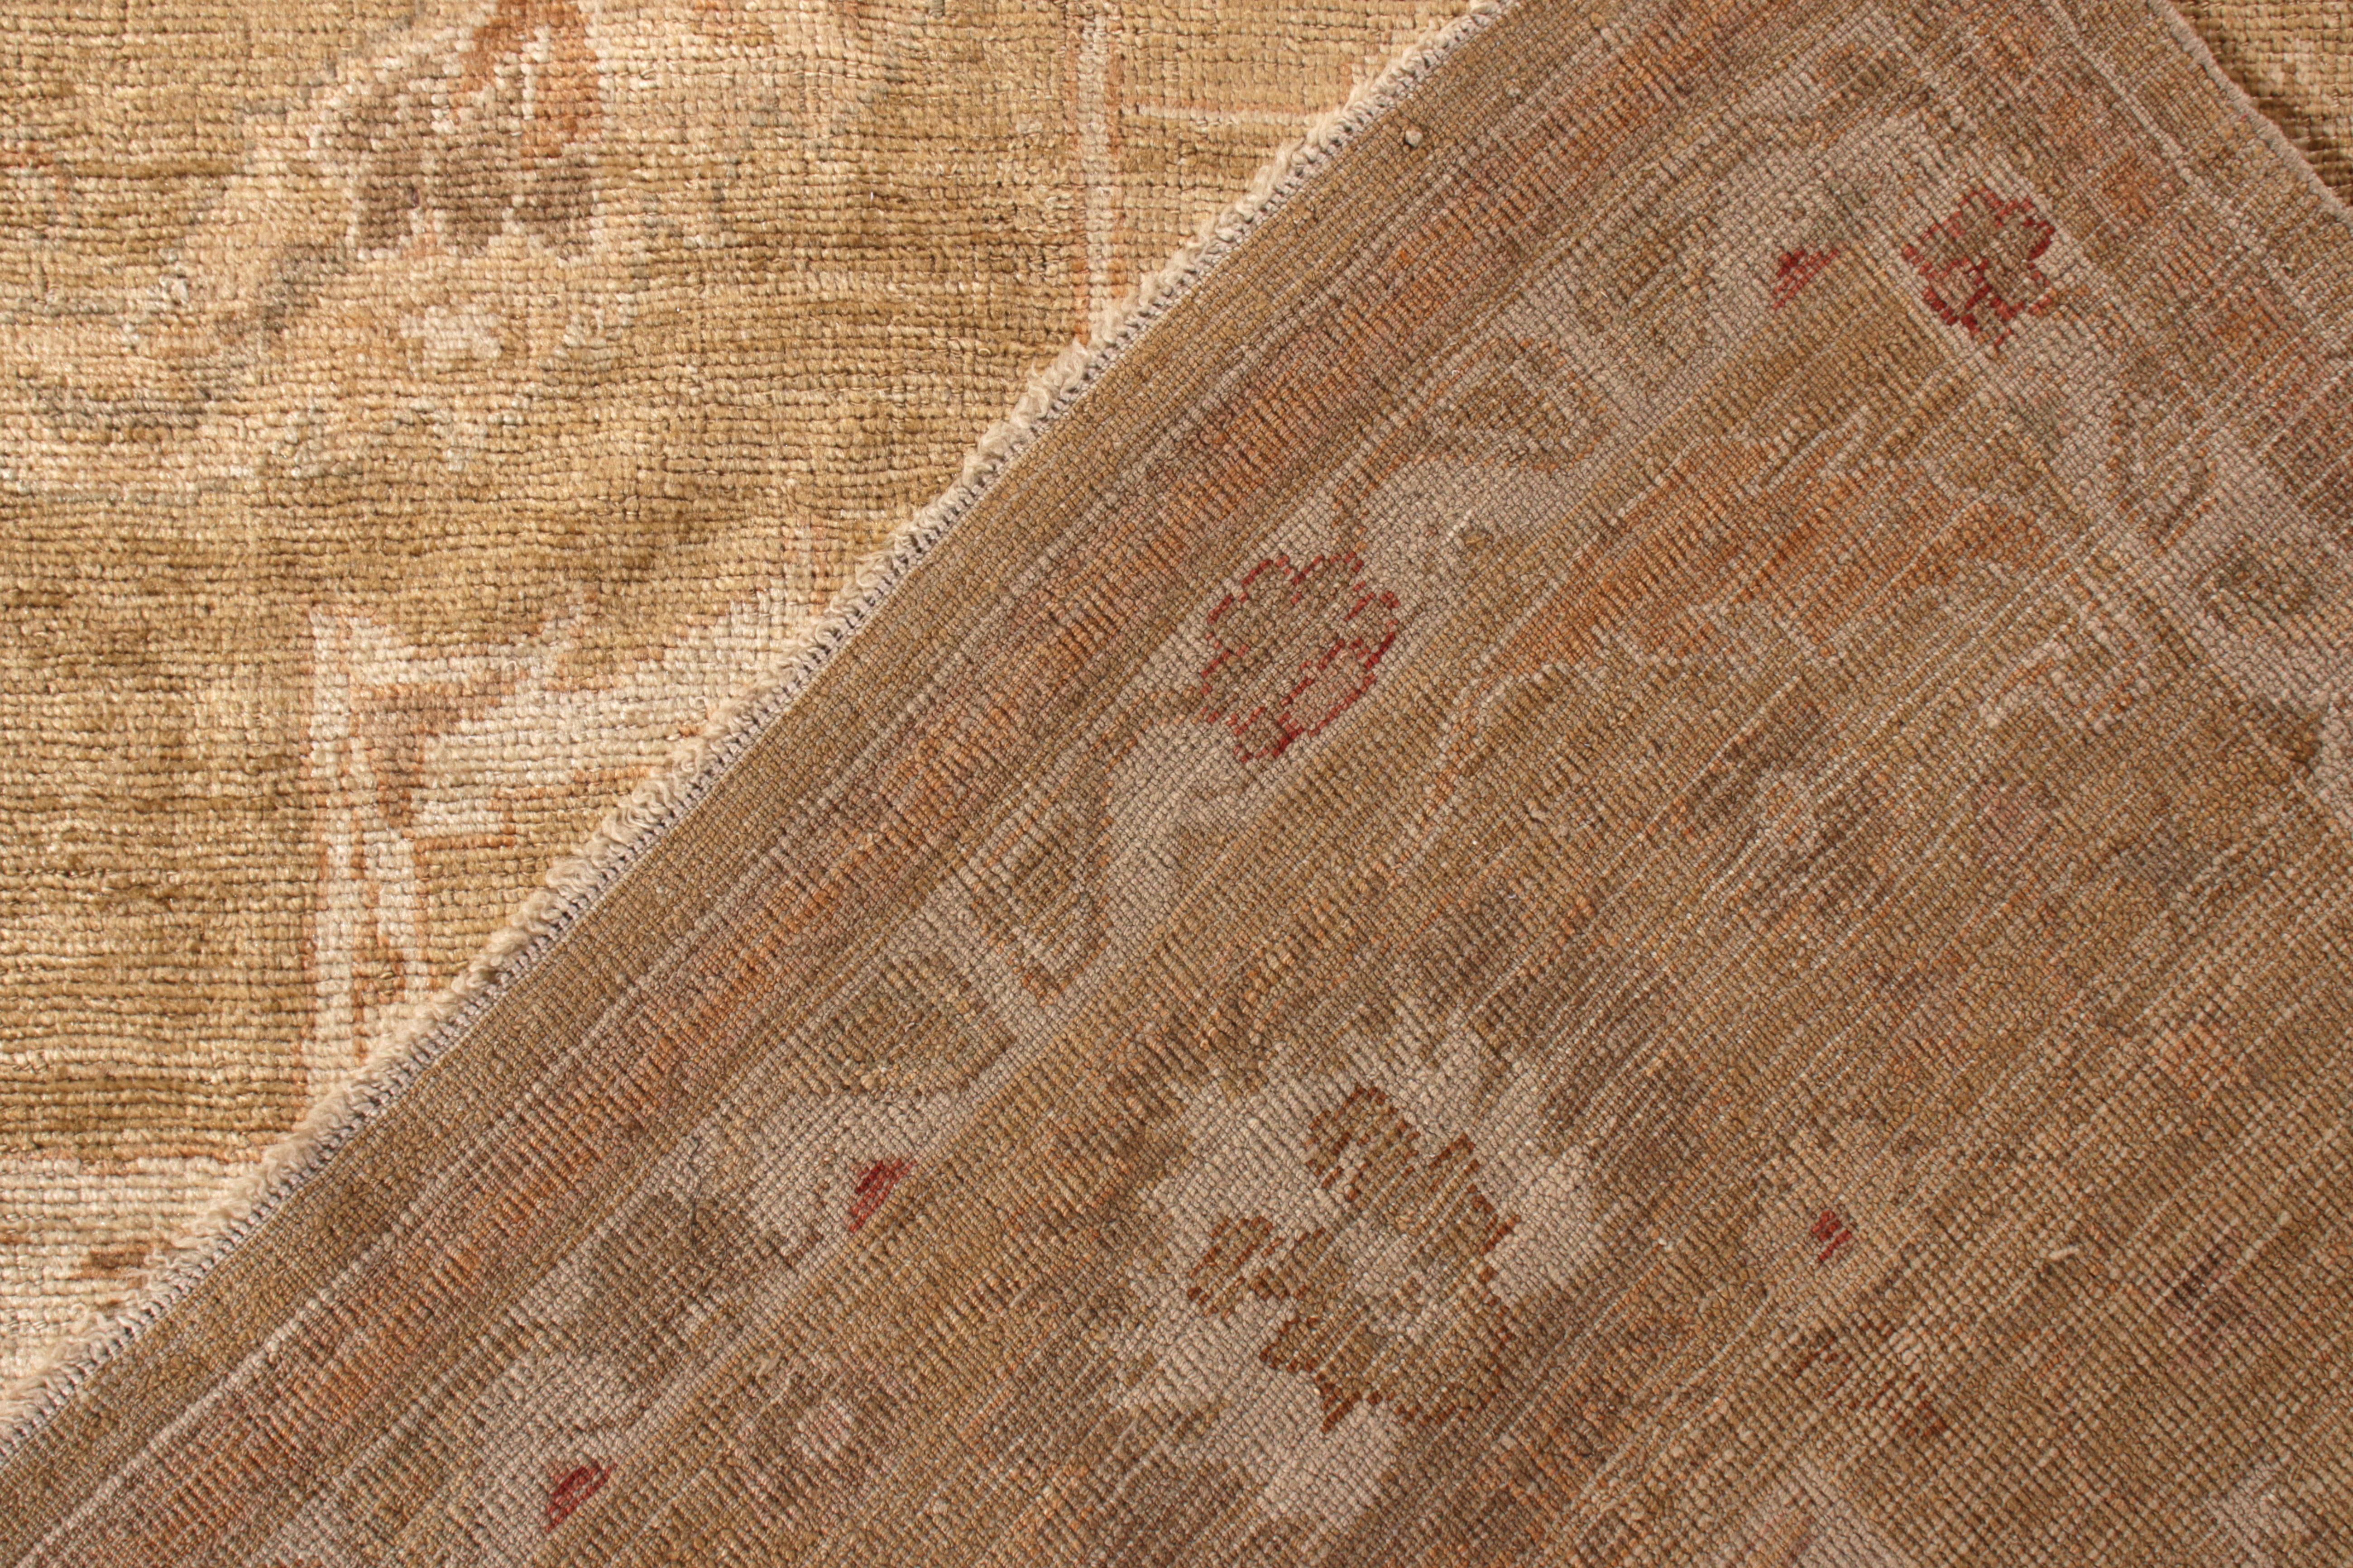 Contemporary Rug & Kilim’s Hand-Knotted Oushak Style Rug in Beige-Brown Floral Pattern For Sale